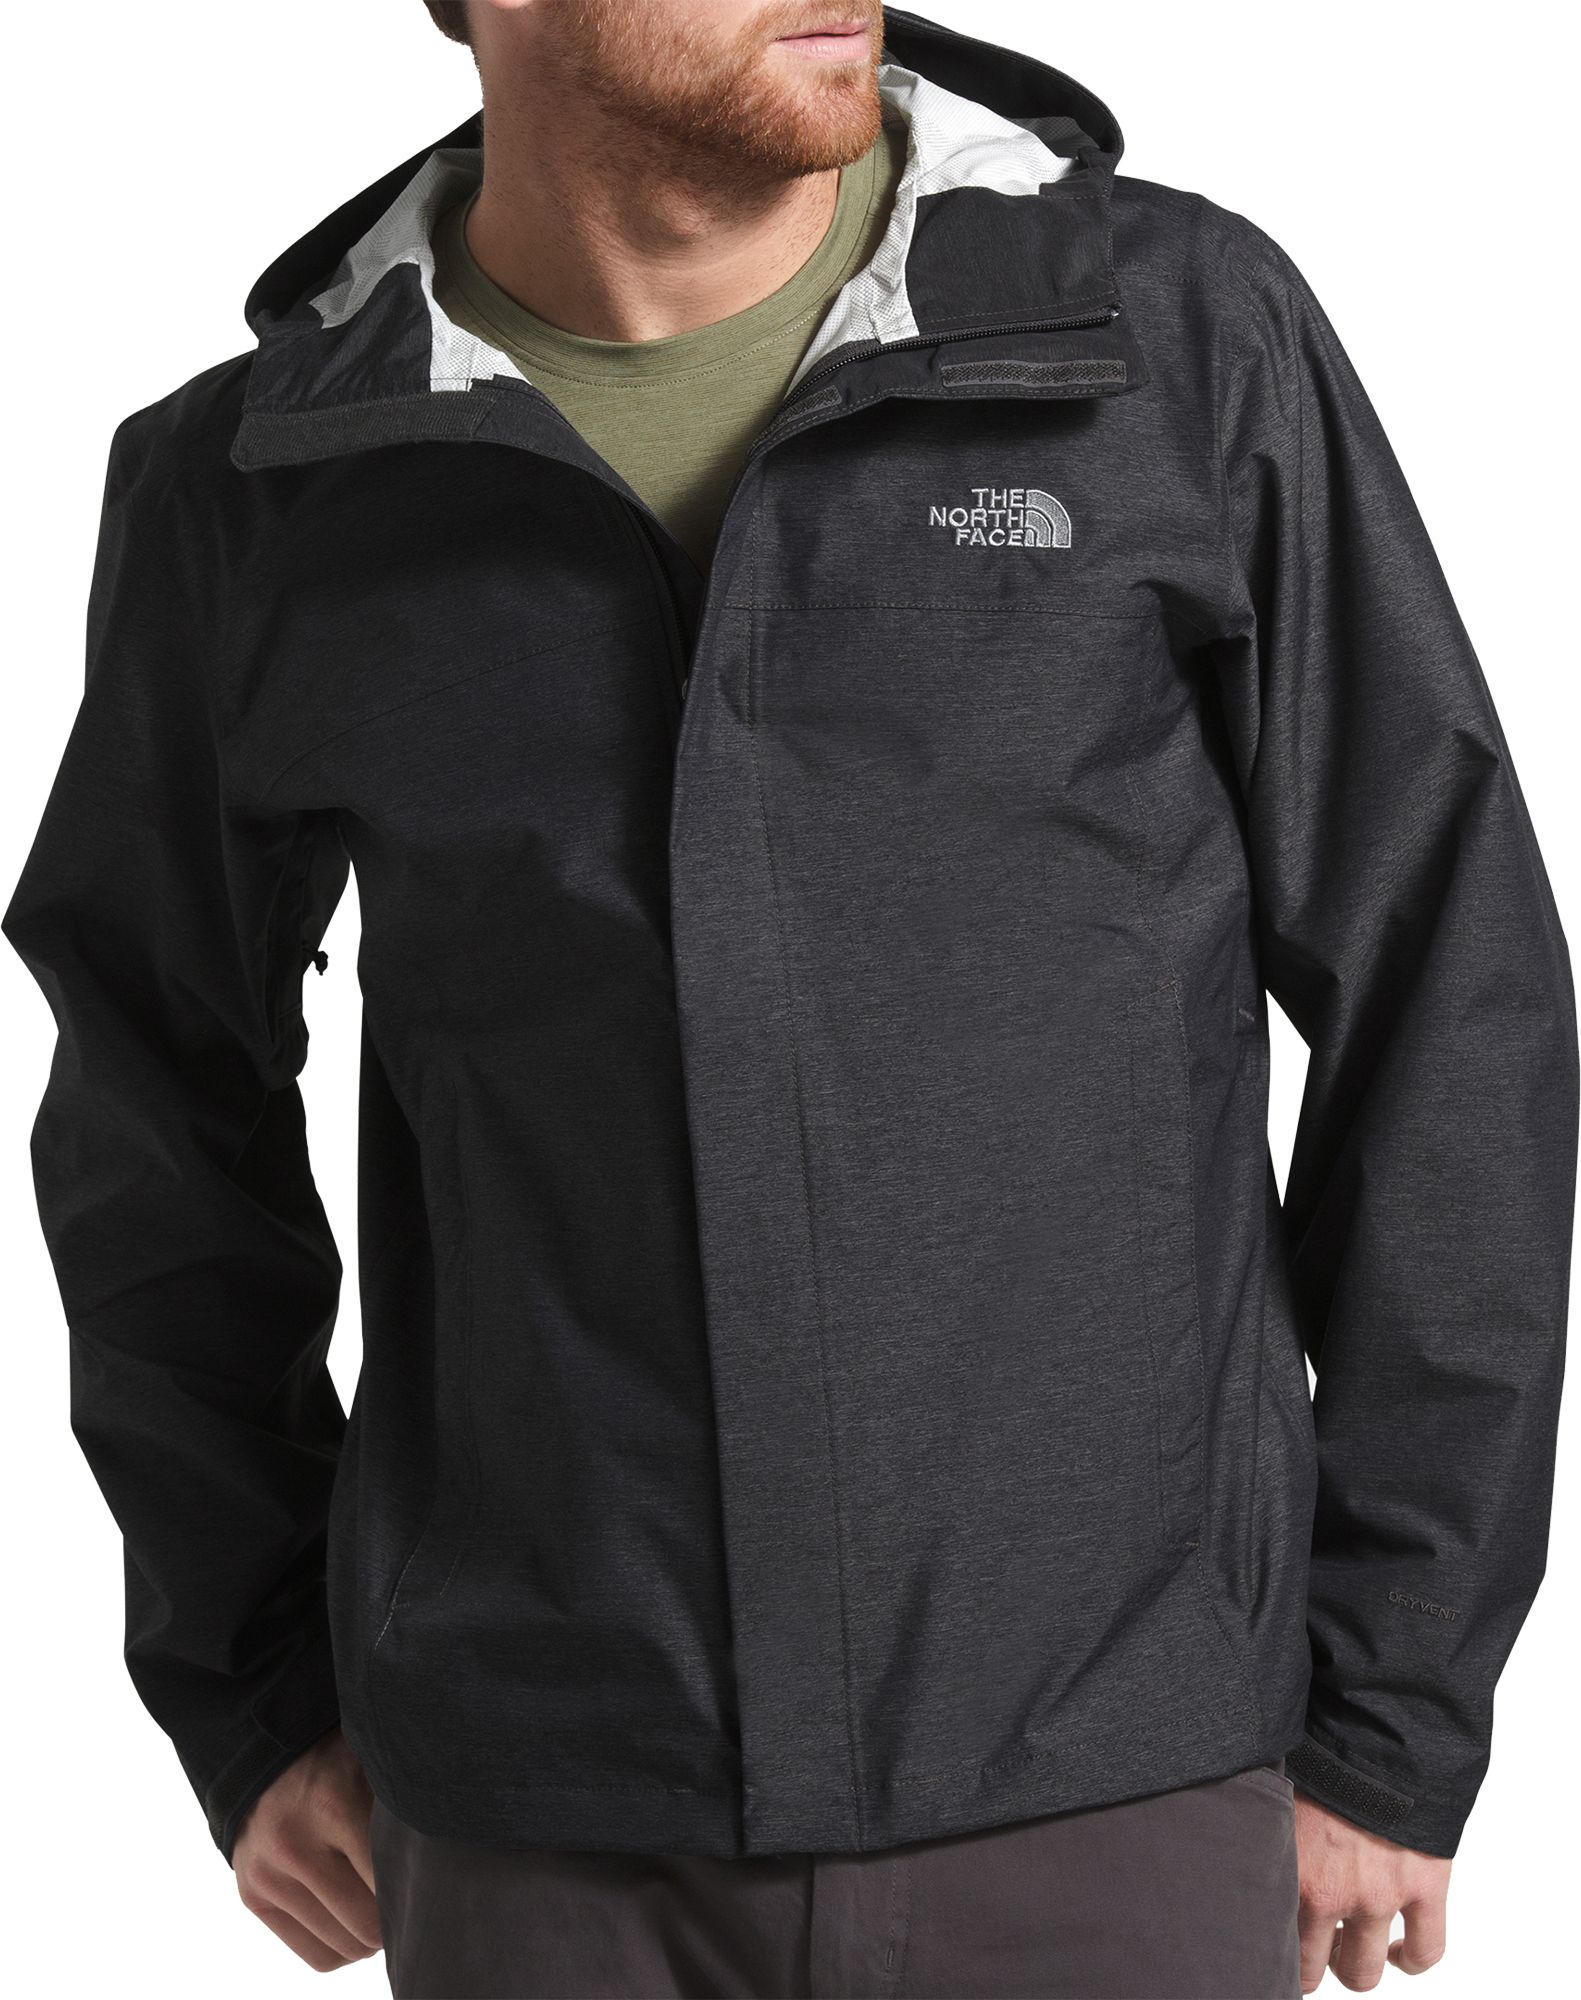 The North Face Men's Venture 2 Jacket (Regular and Big & Tall) - .97 - .97